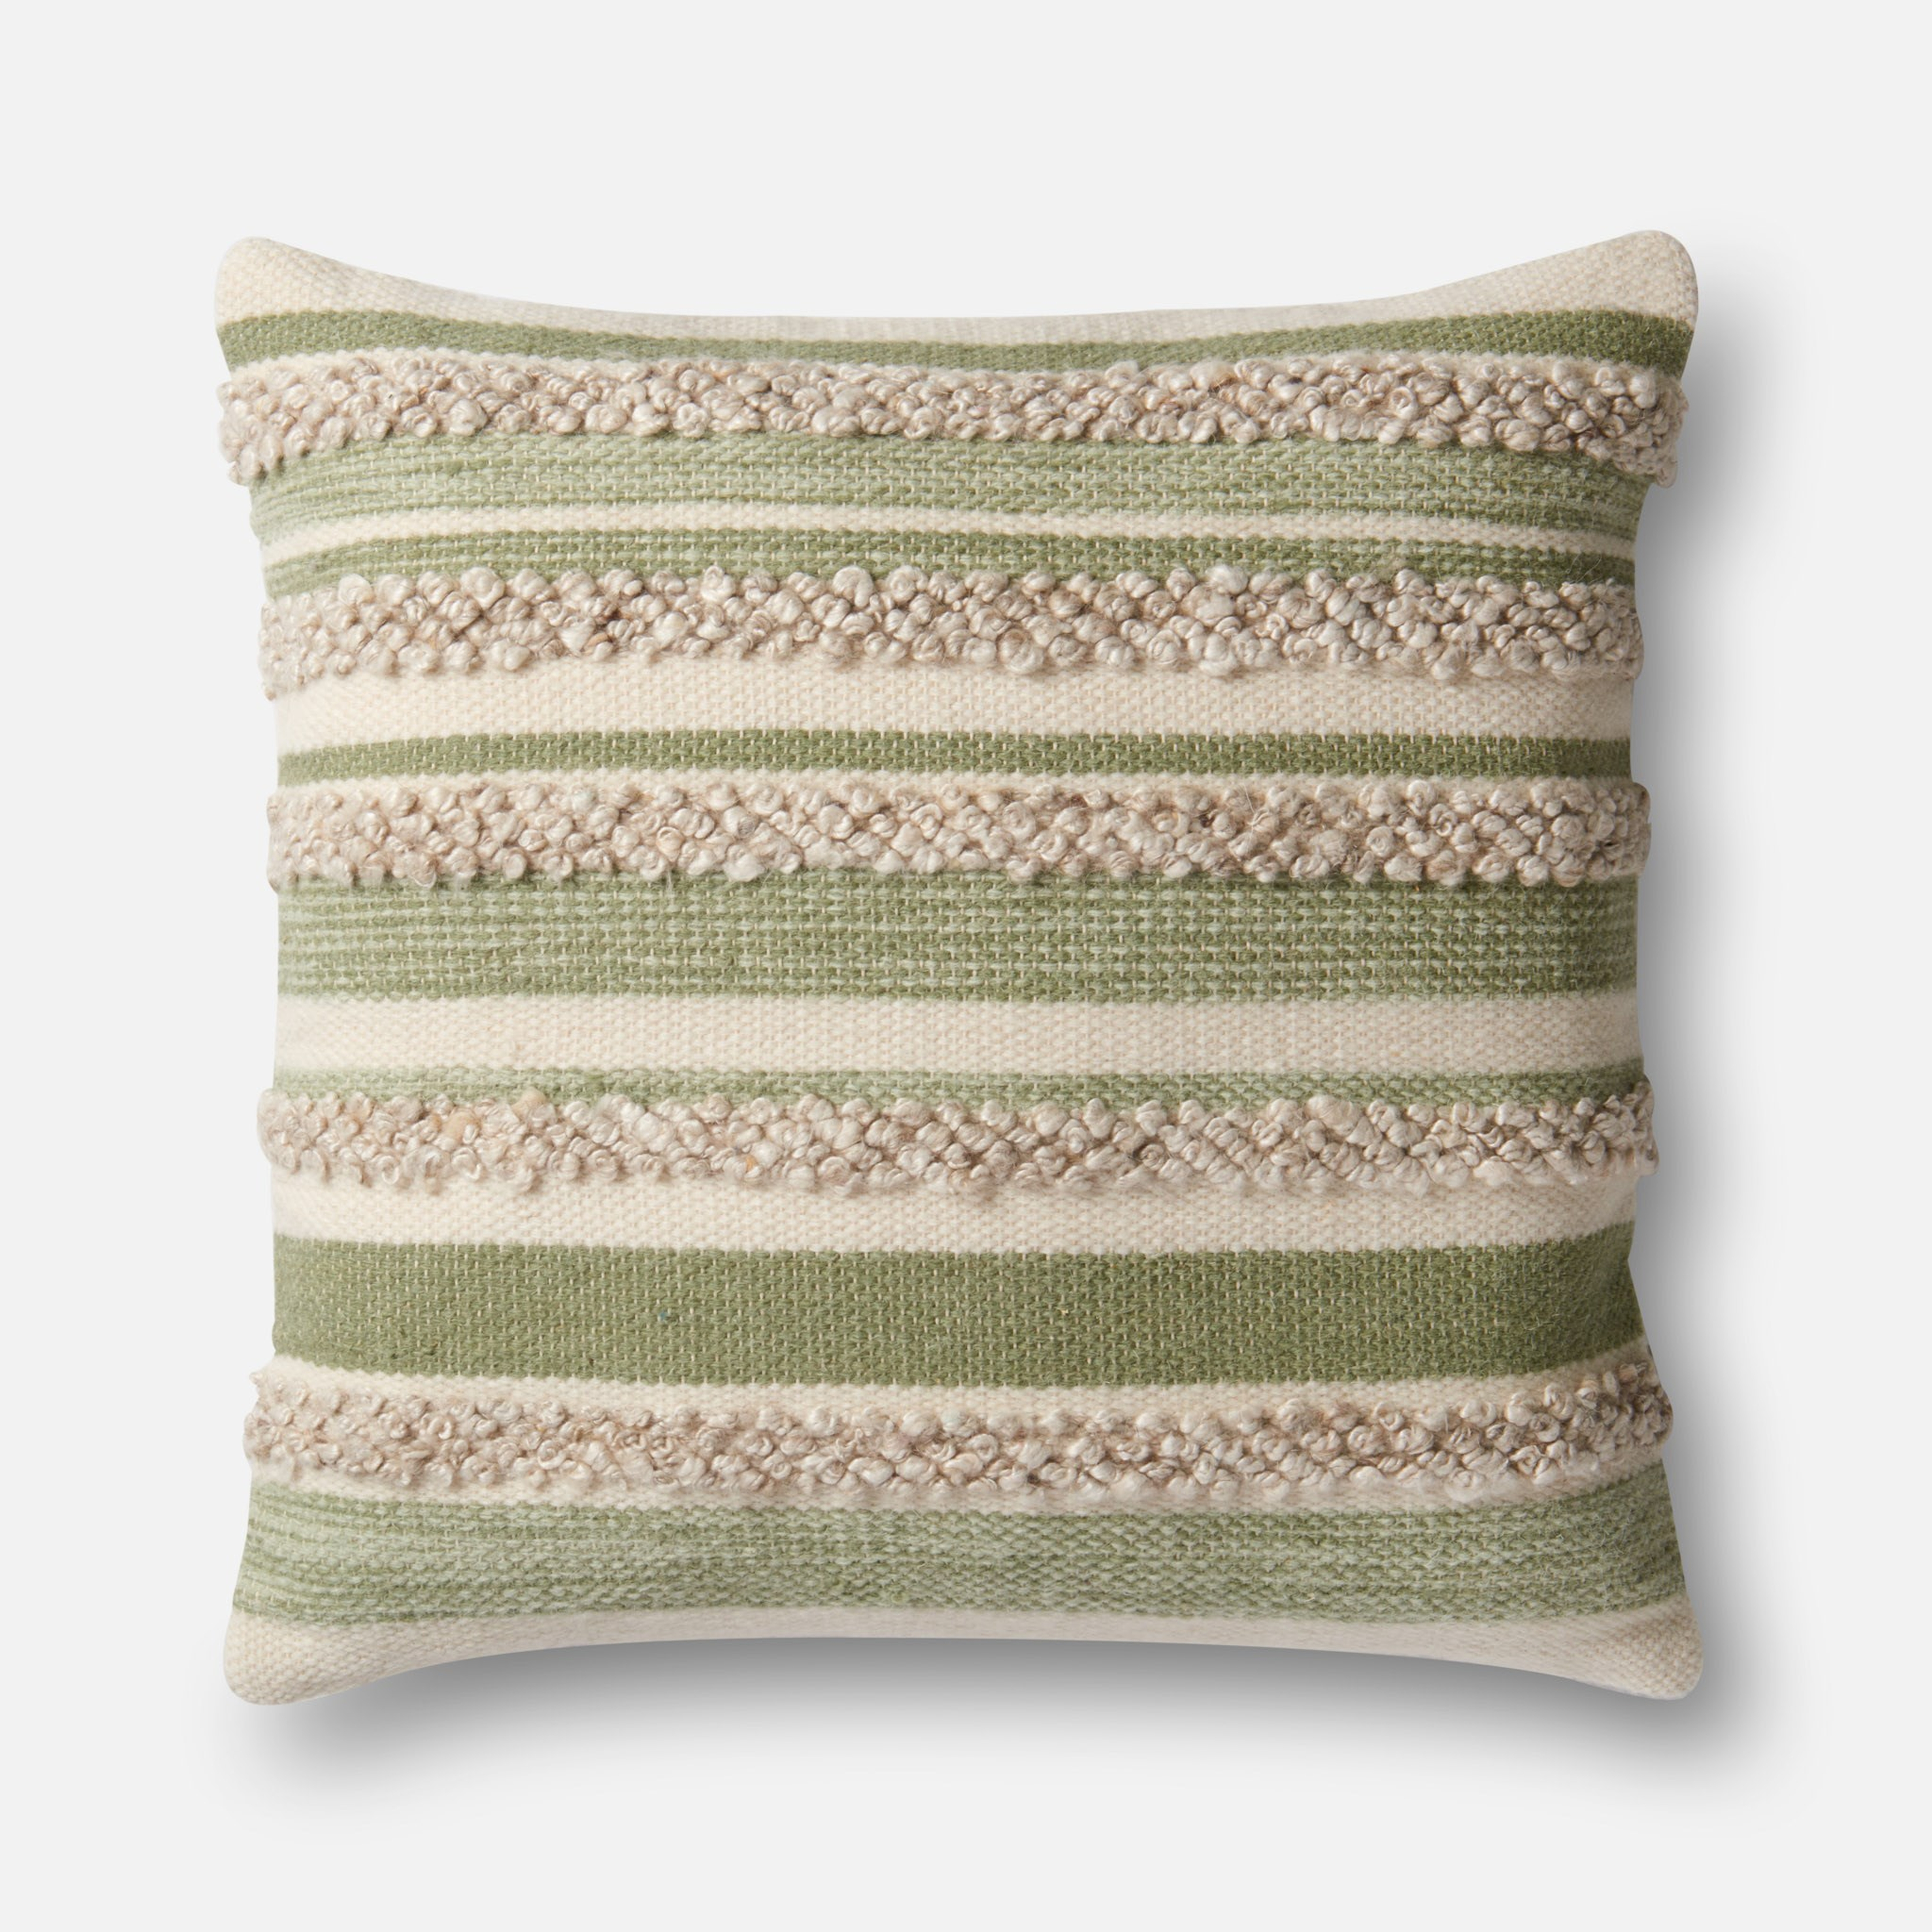 PILLOWS - SAGE / IVORY - Magnolia Home by Joana Gaines Crafted by Loloi Rugs